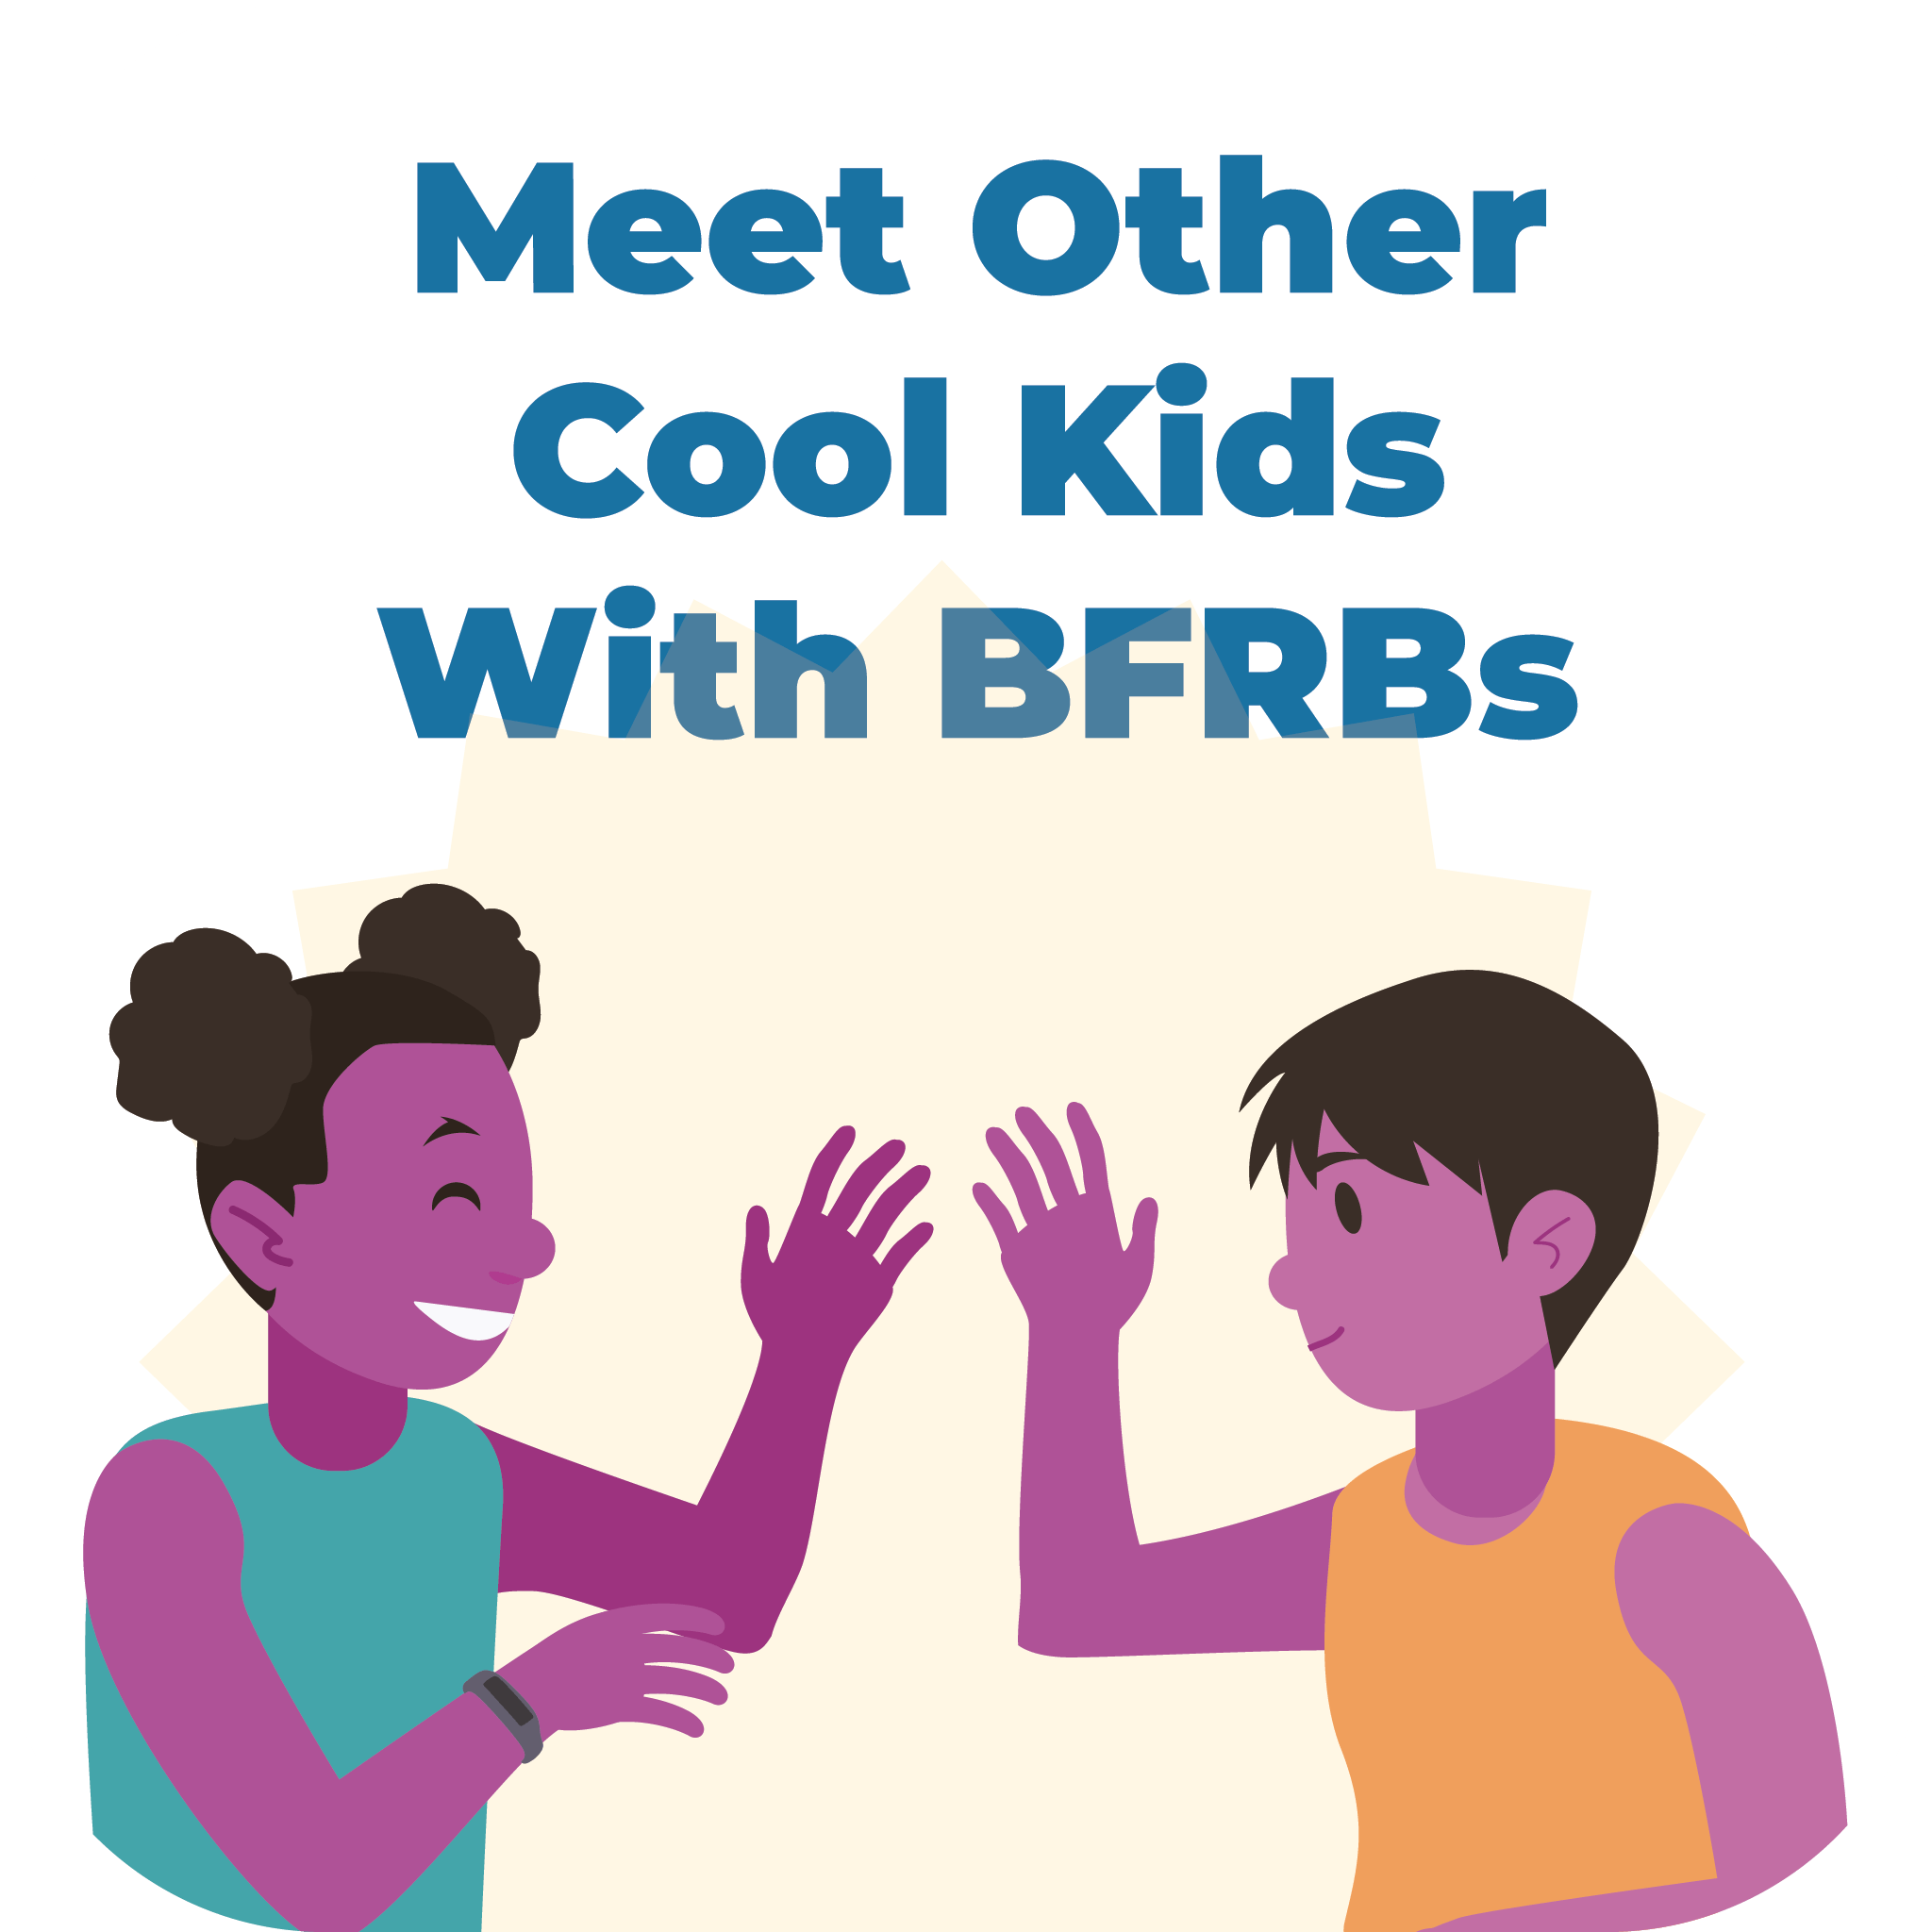 Meet other cool kids with bfrs.